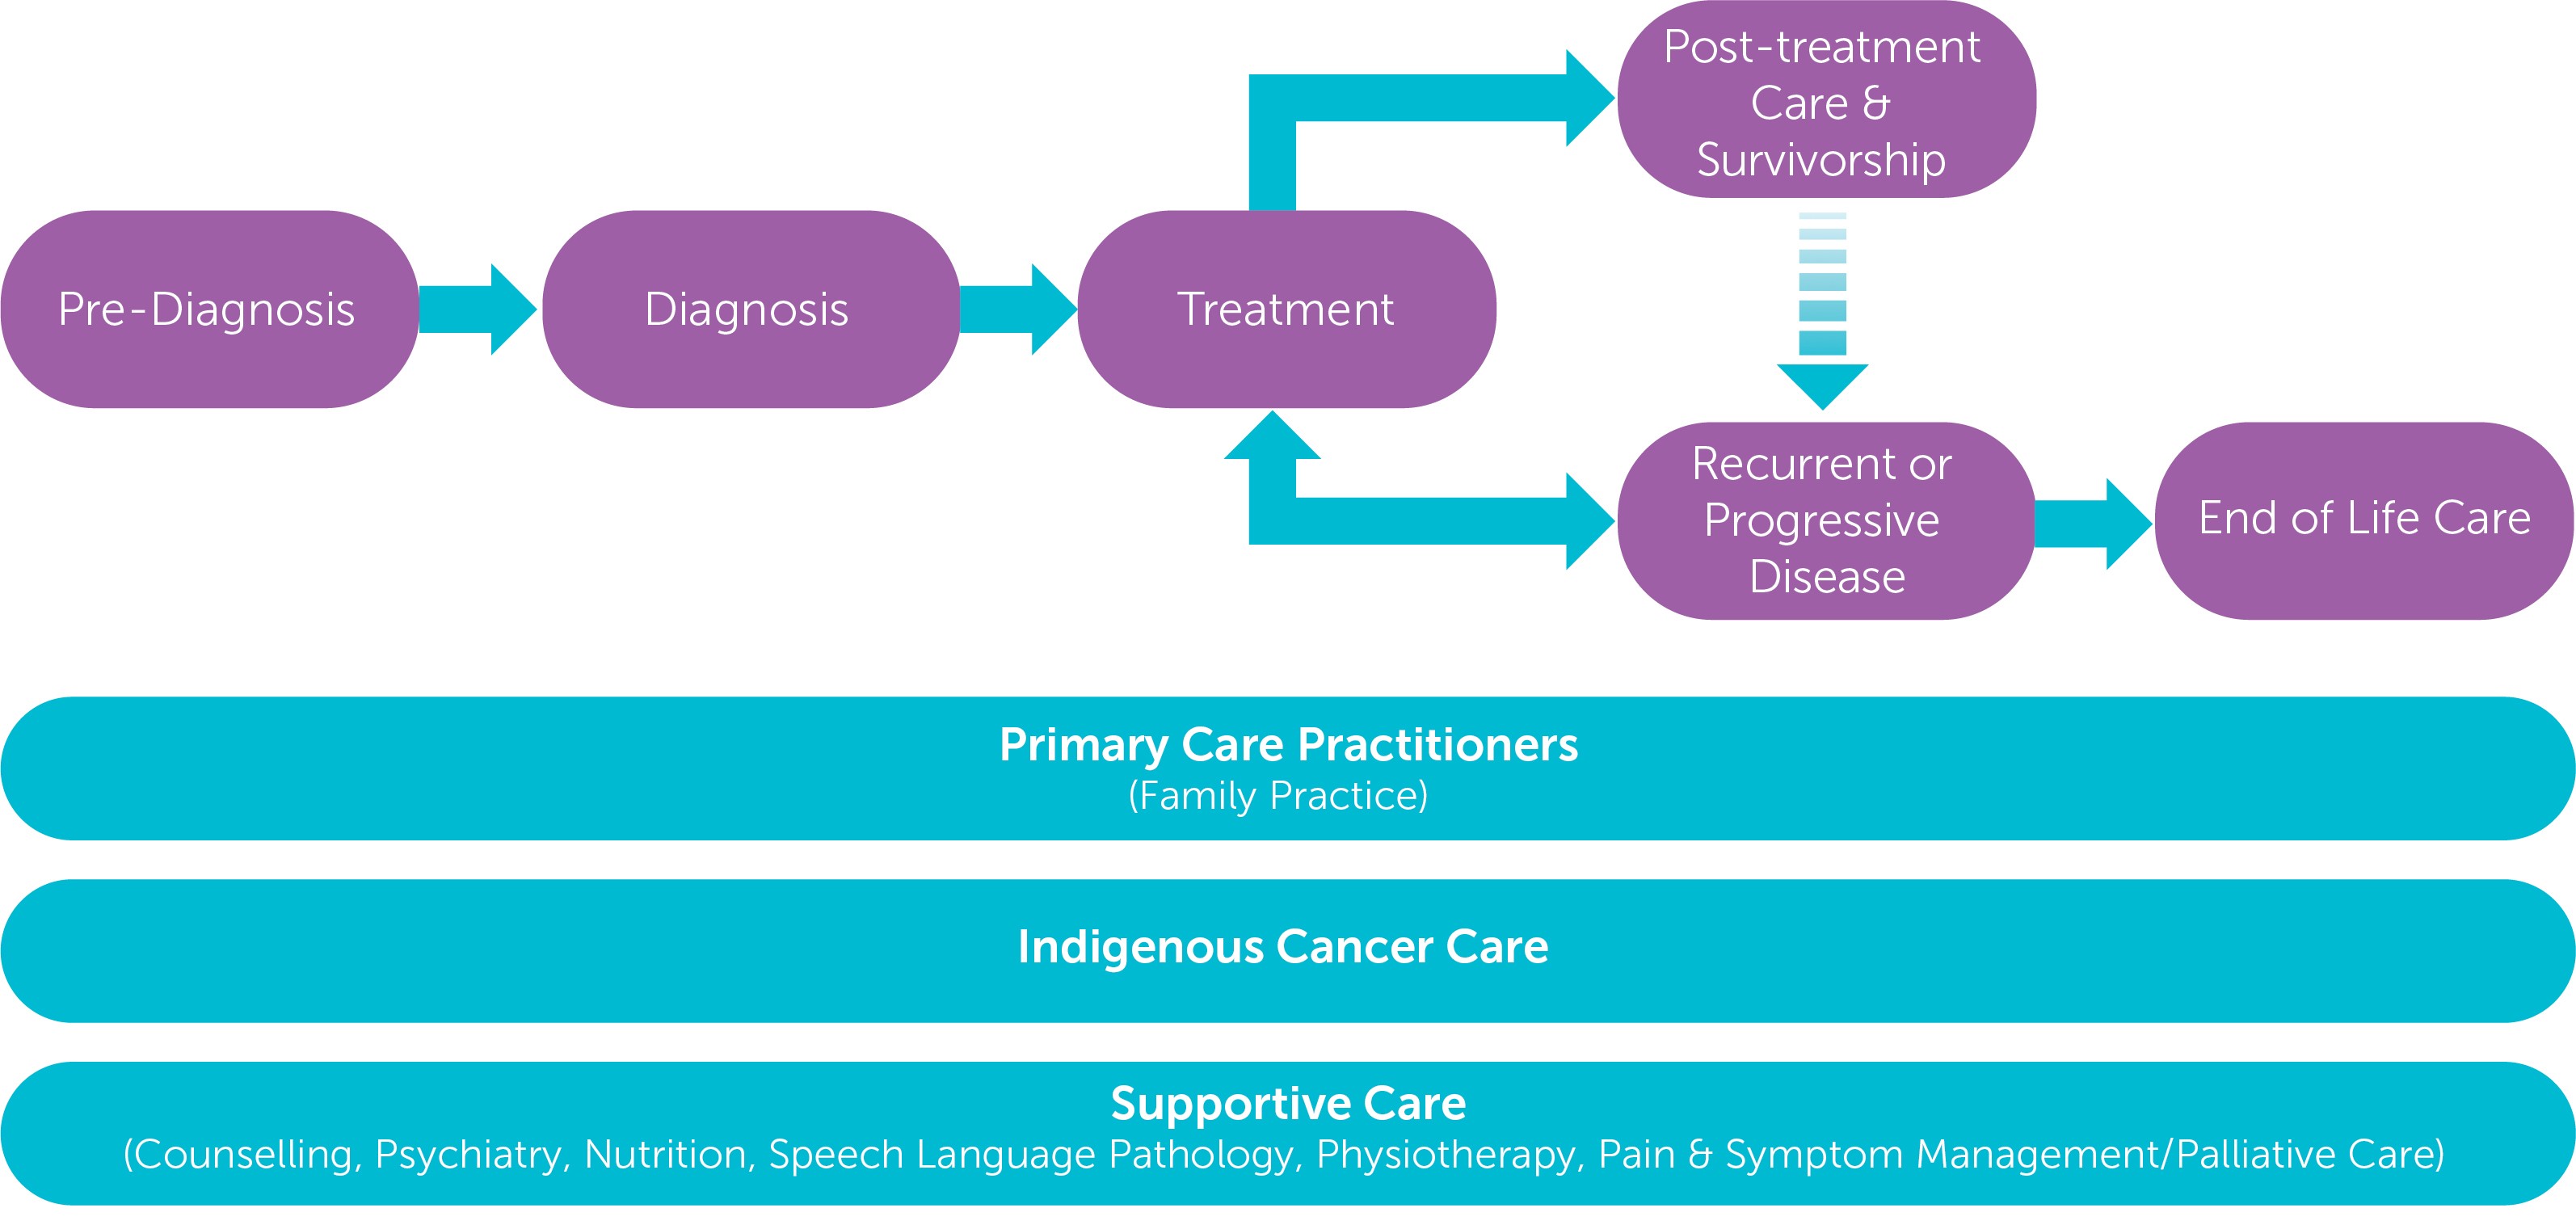 Clinical Care Pathways for Patients